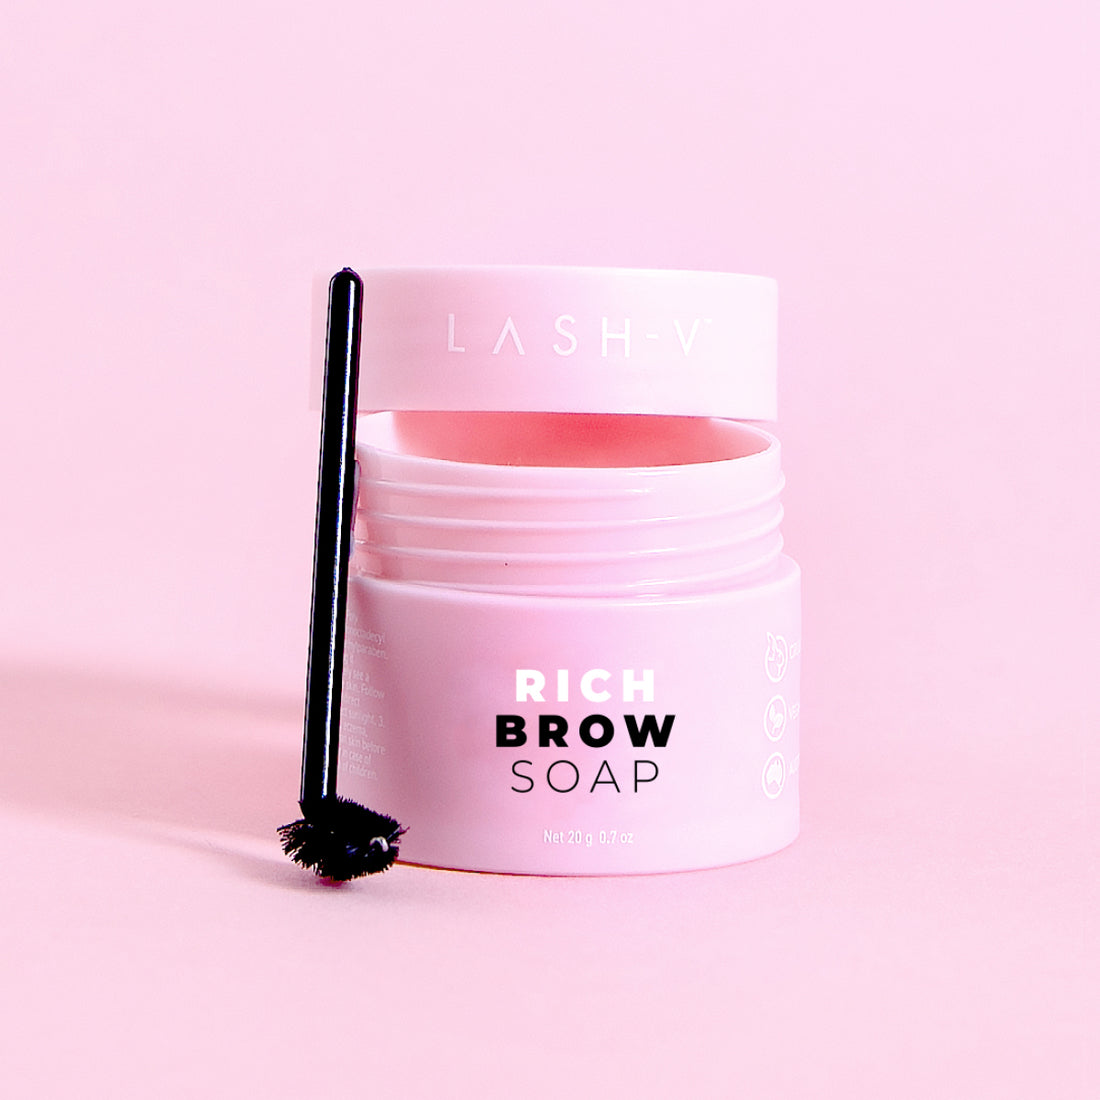 RICH BROW SOAP - instant brow lamination